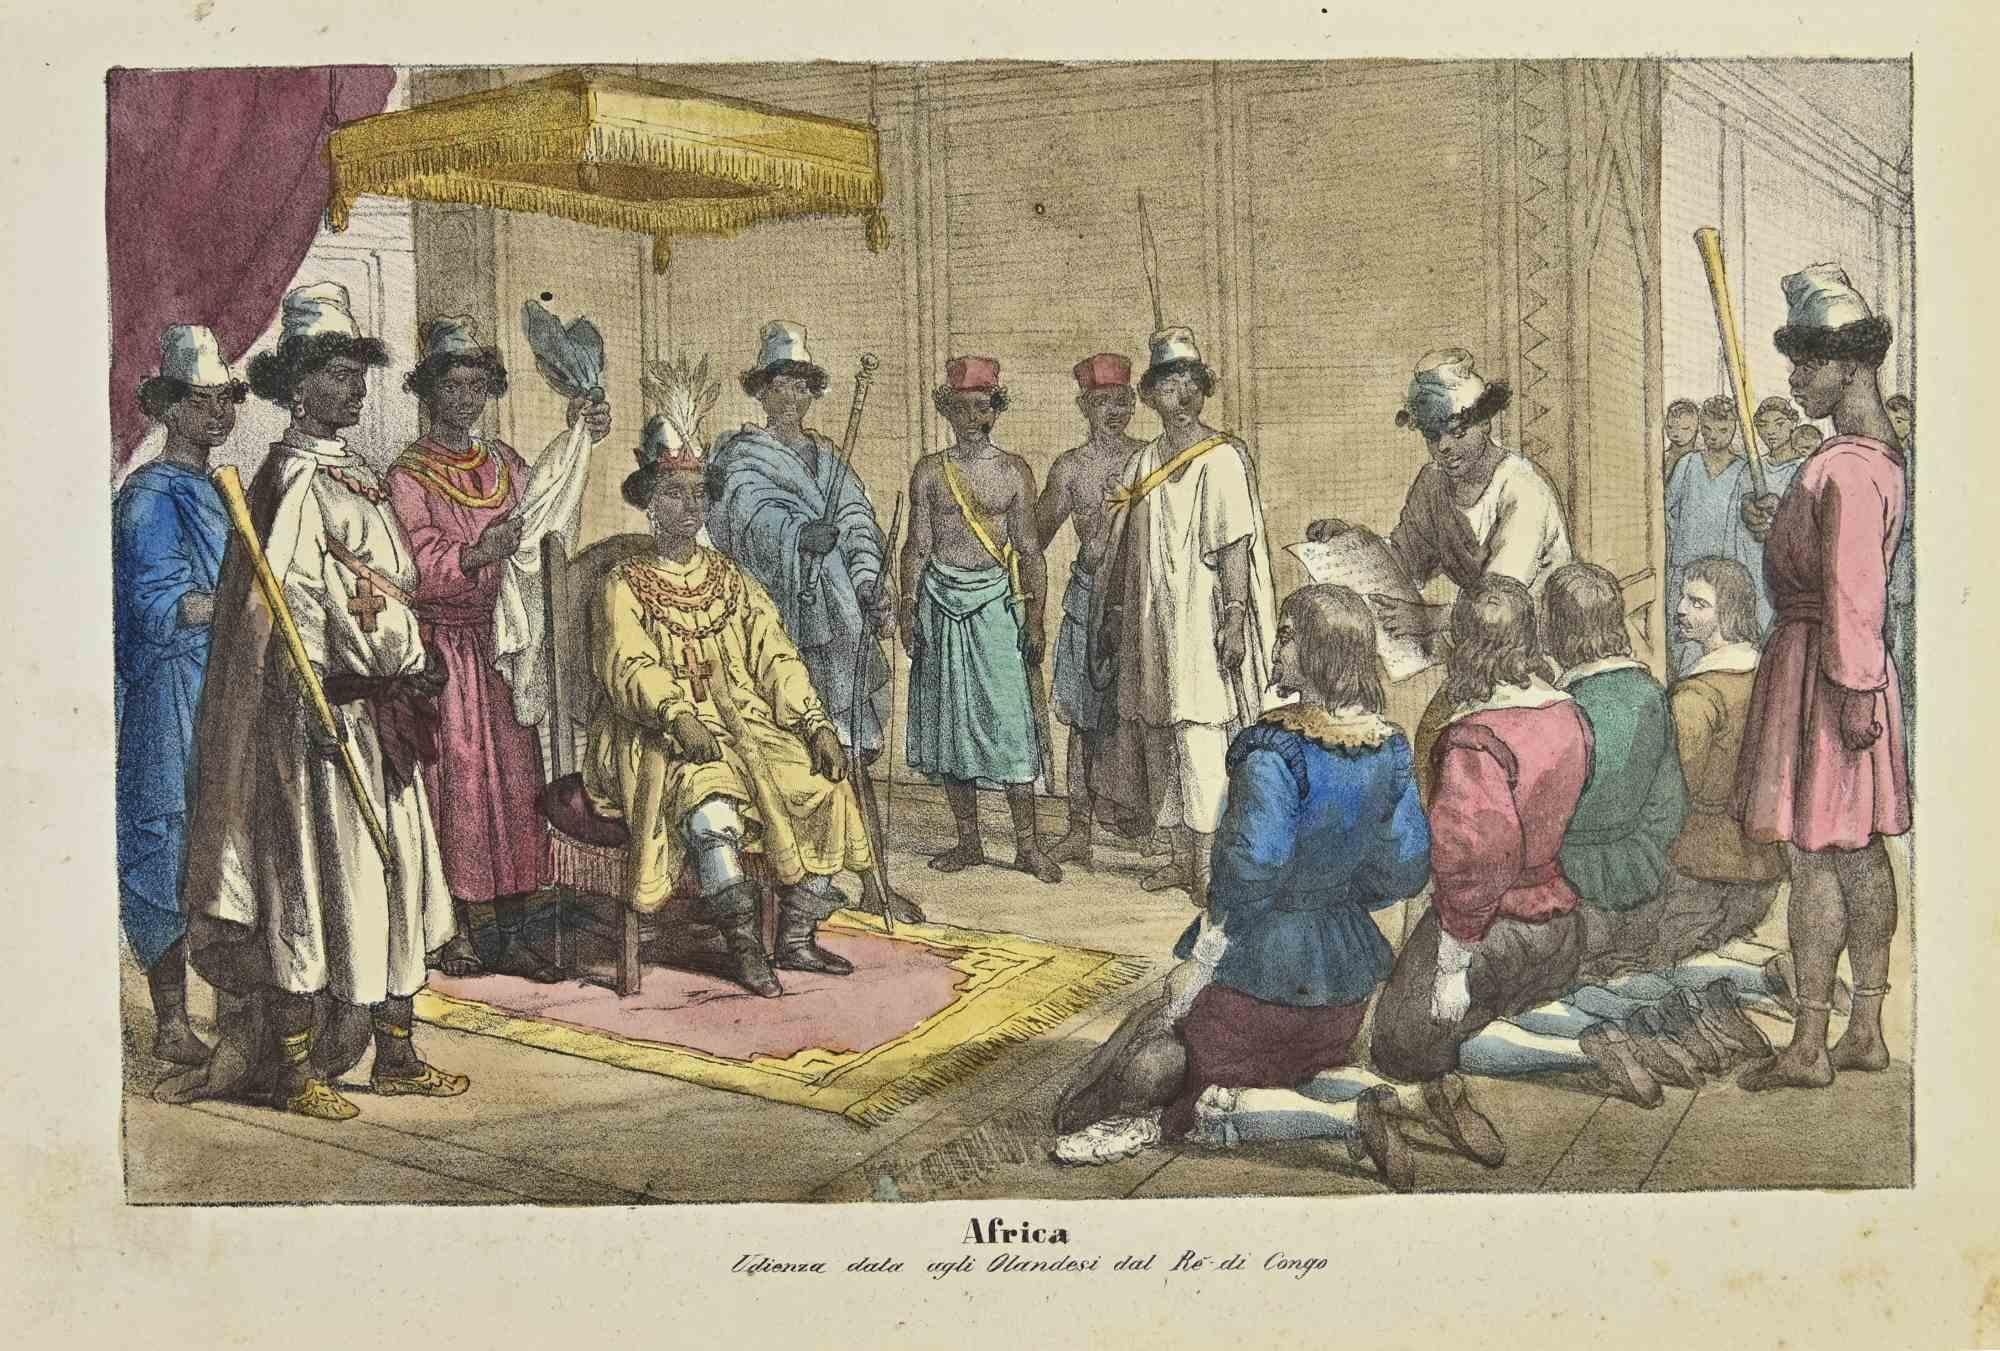 Ancient African Customs is a lithograph realized by Auguste Wahlen in 1844.

Hand colored.

Good condition.

At the center of the artwork is the original title "Africa" and subtitle "Udienza data agli Olandesi dal Re di Congo" (translated, "Audience